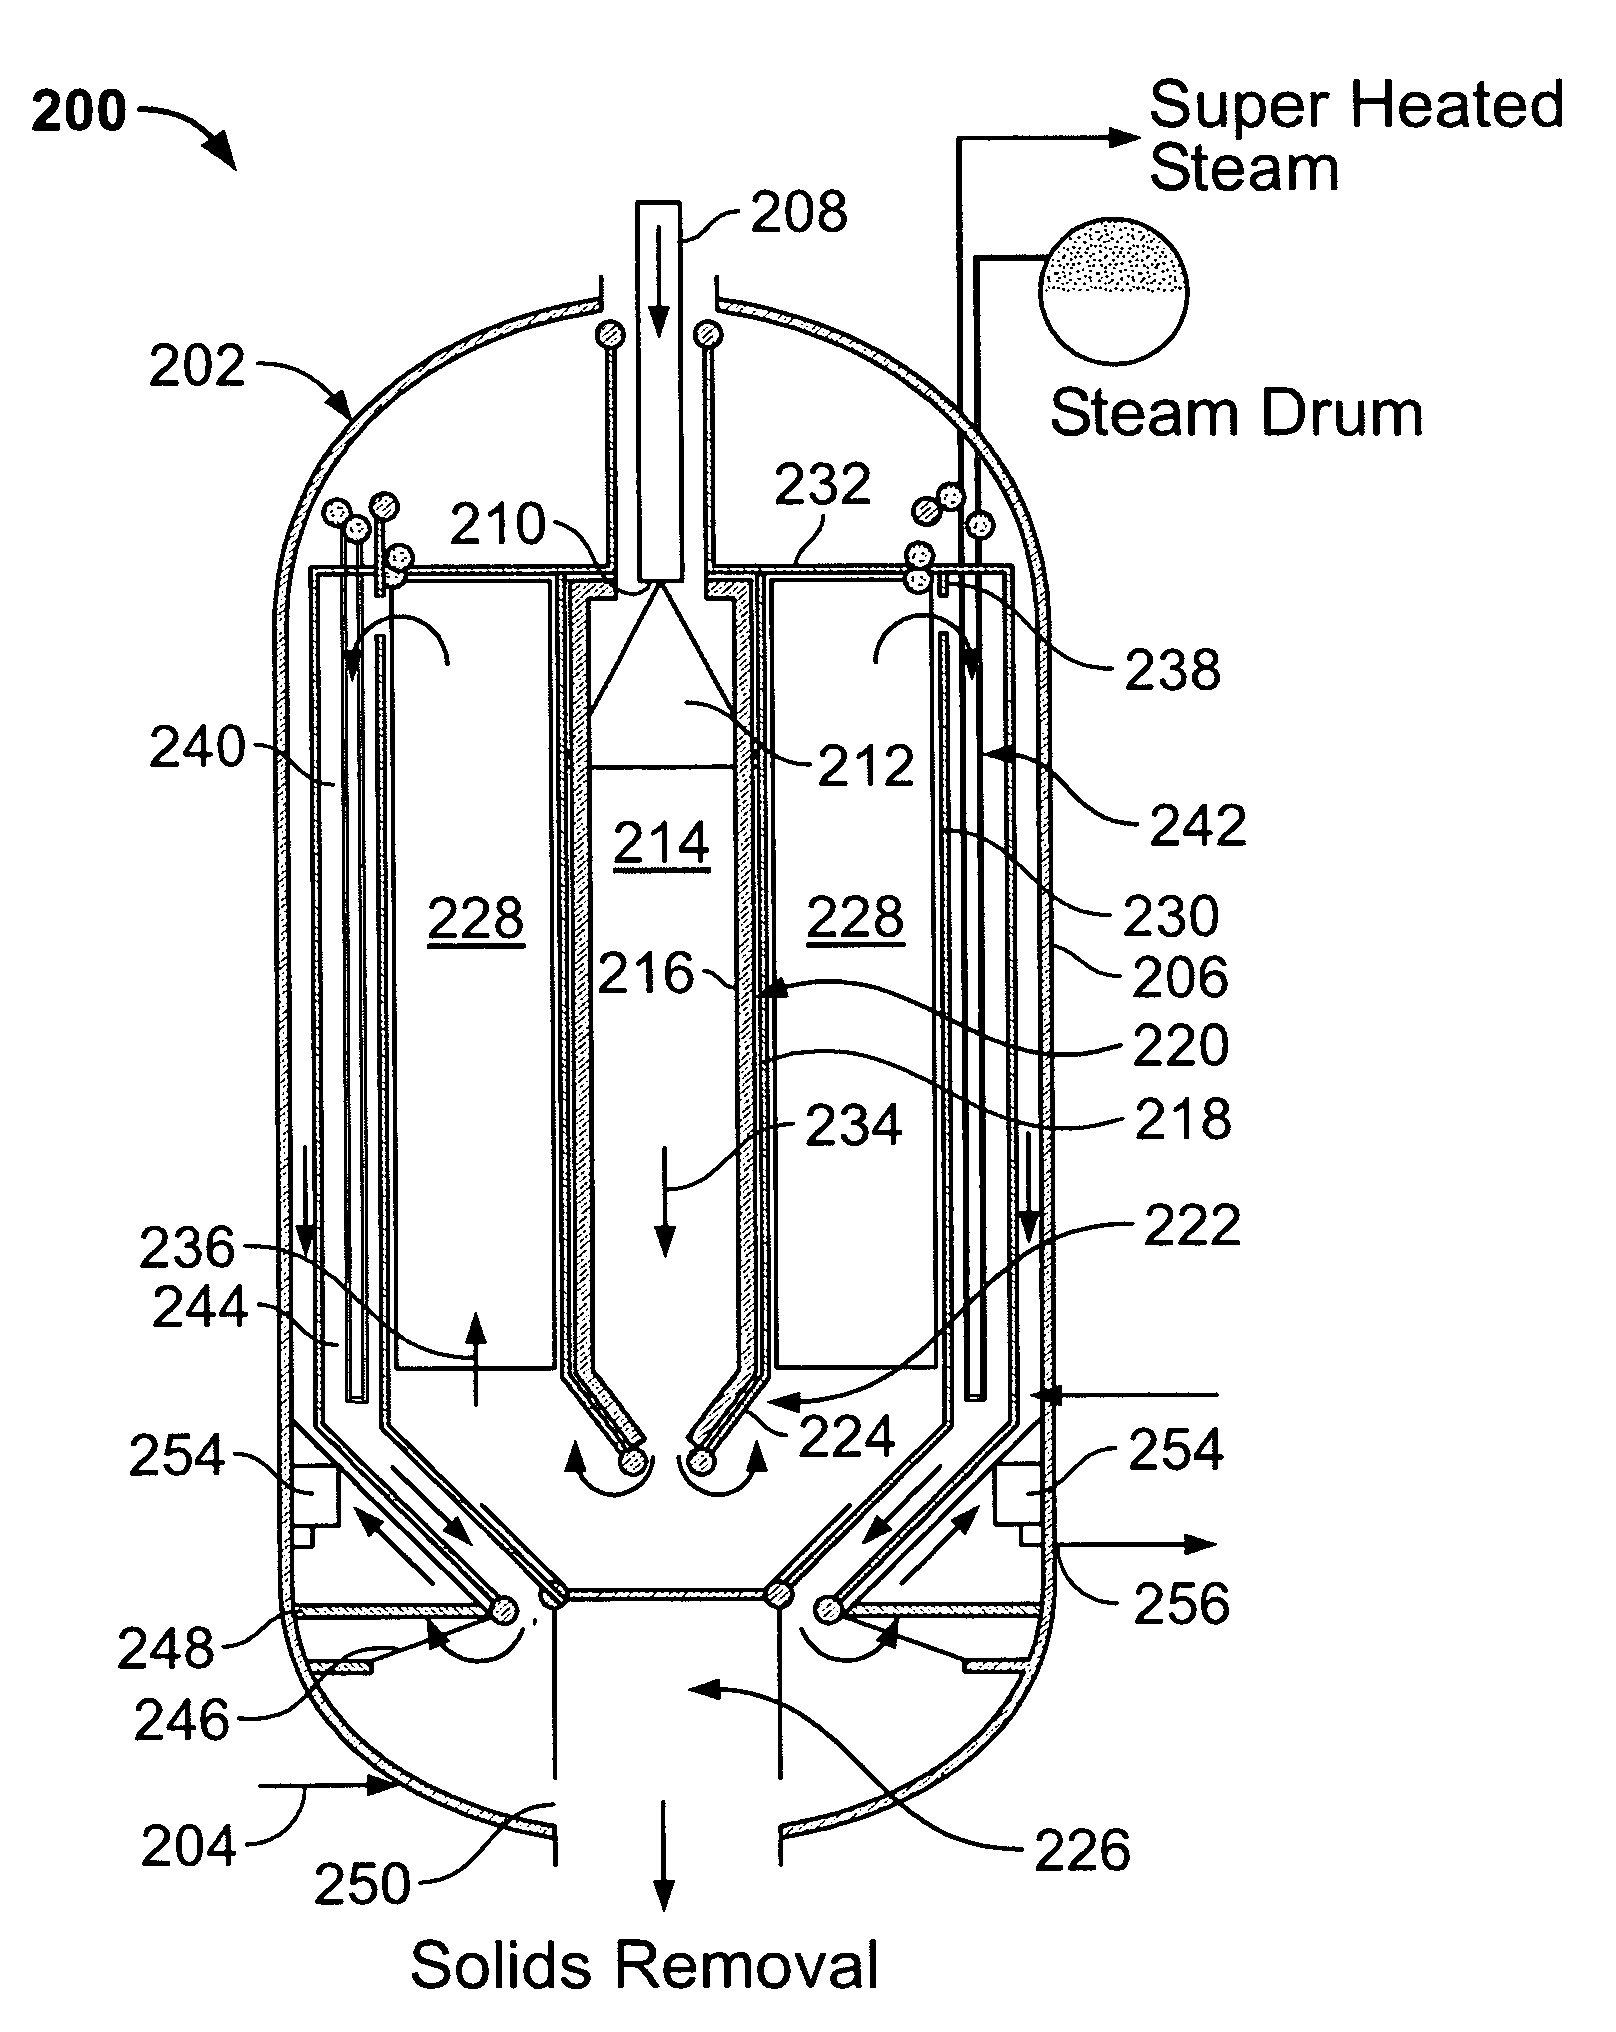 Methods and systems for advanced gasifier solids removal